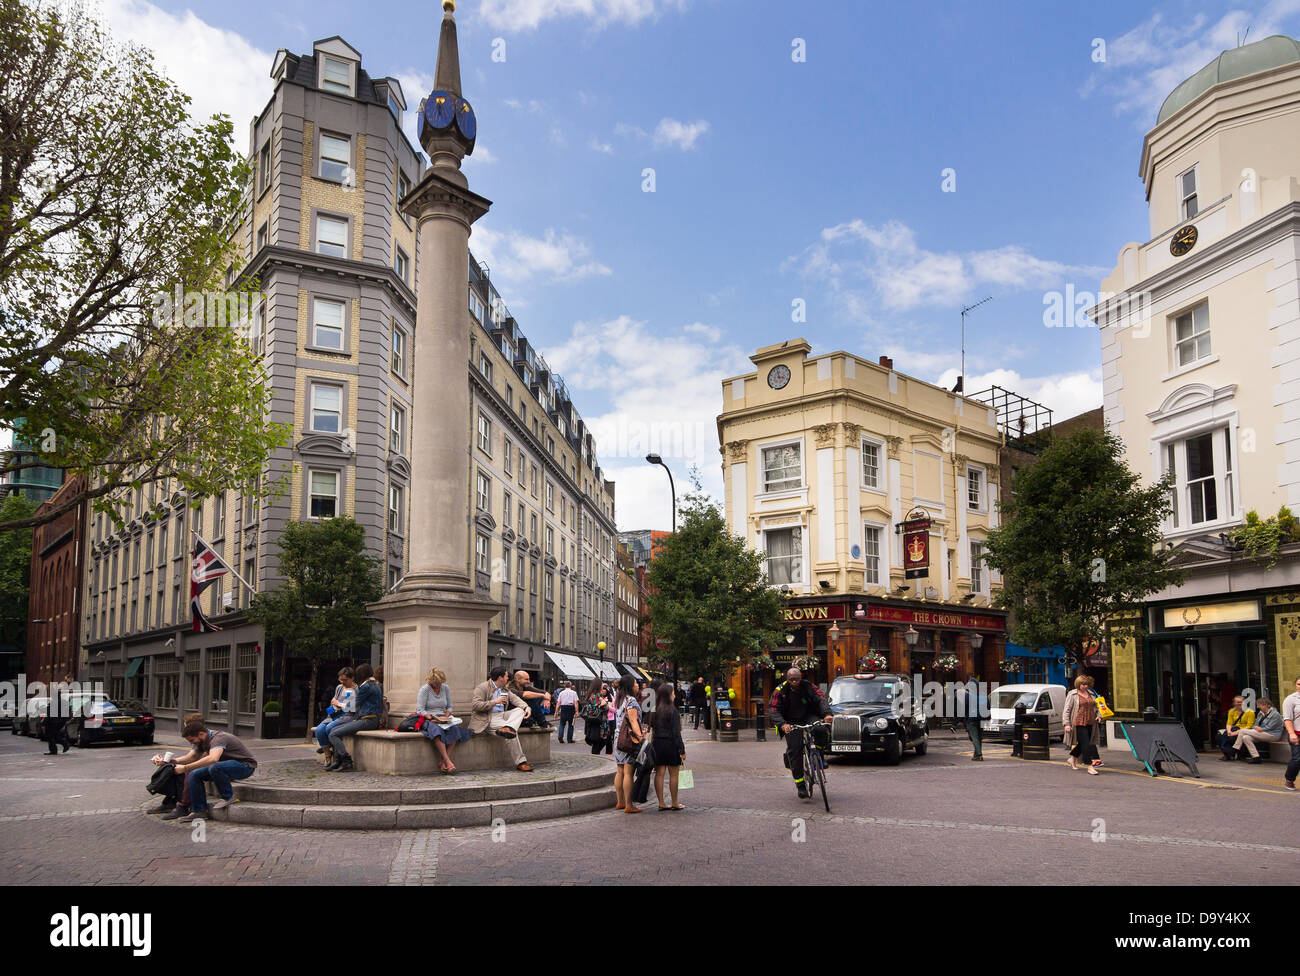 The Seven Dials junction, Covent Garden, London Stock Photo